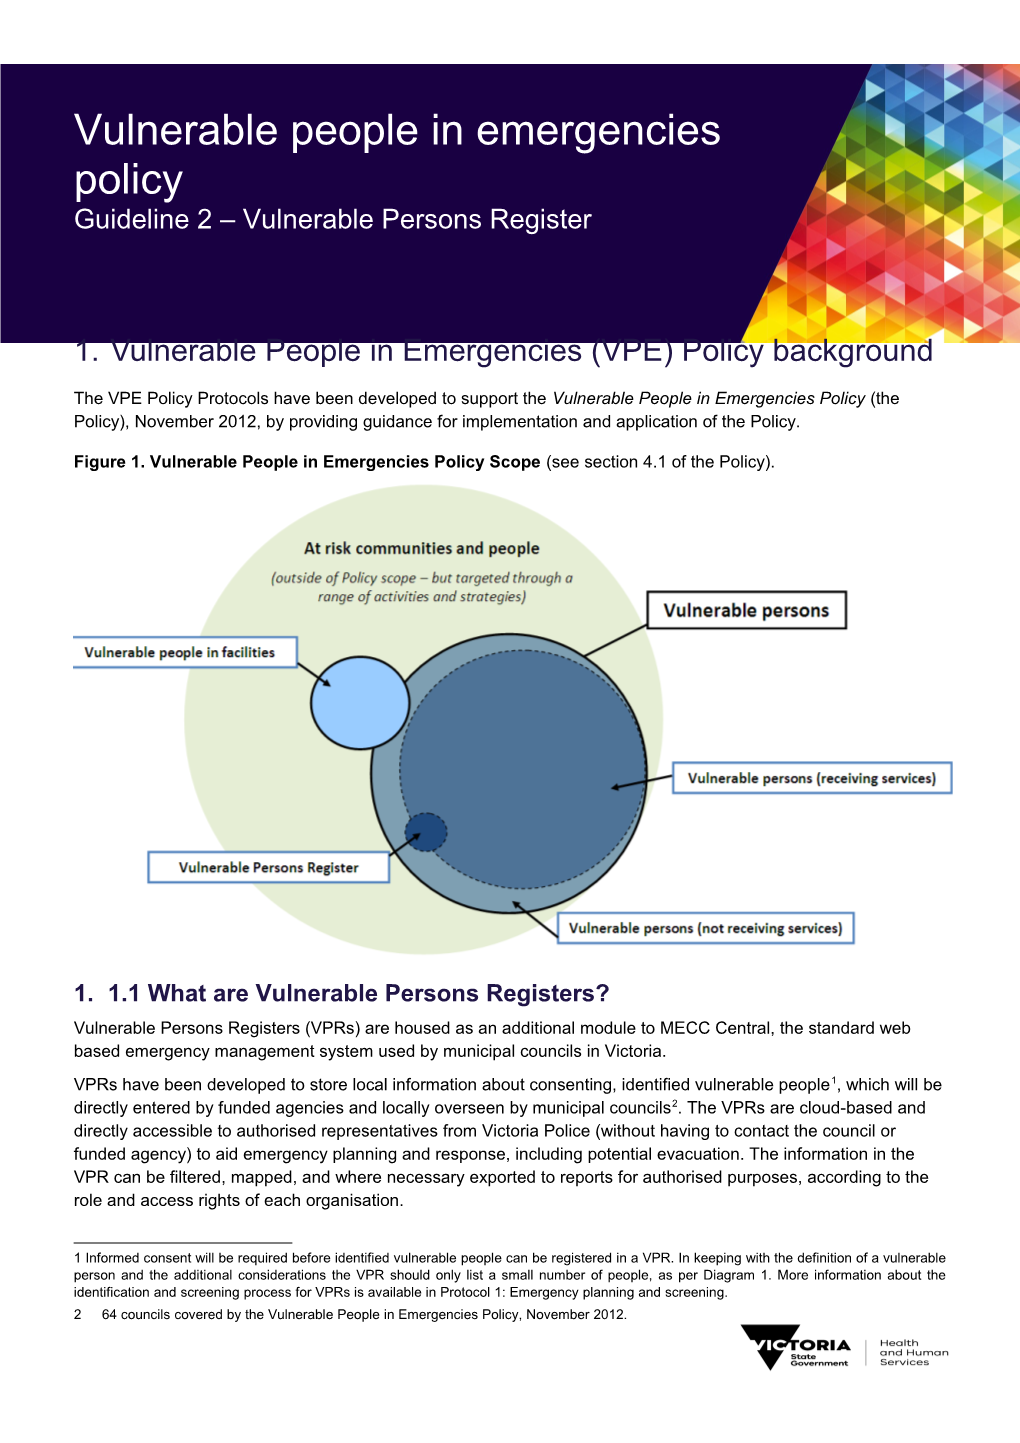 Vulnerable People in Emergencies Policy: Guideline 2 Vulnerable Persons Register